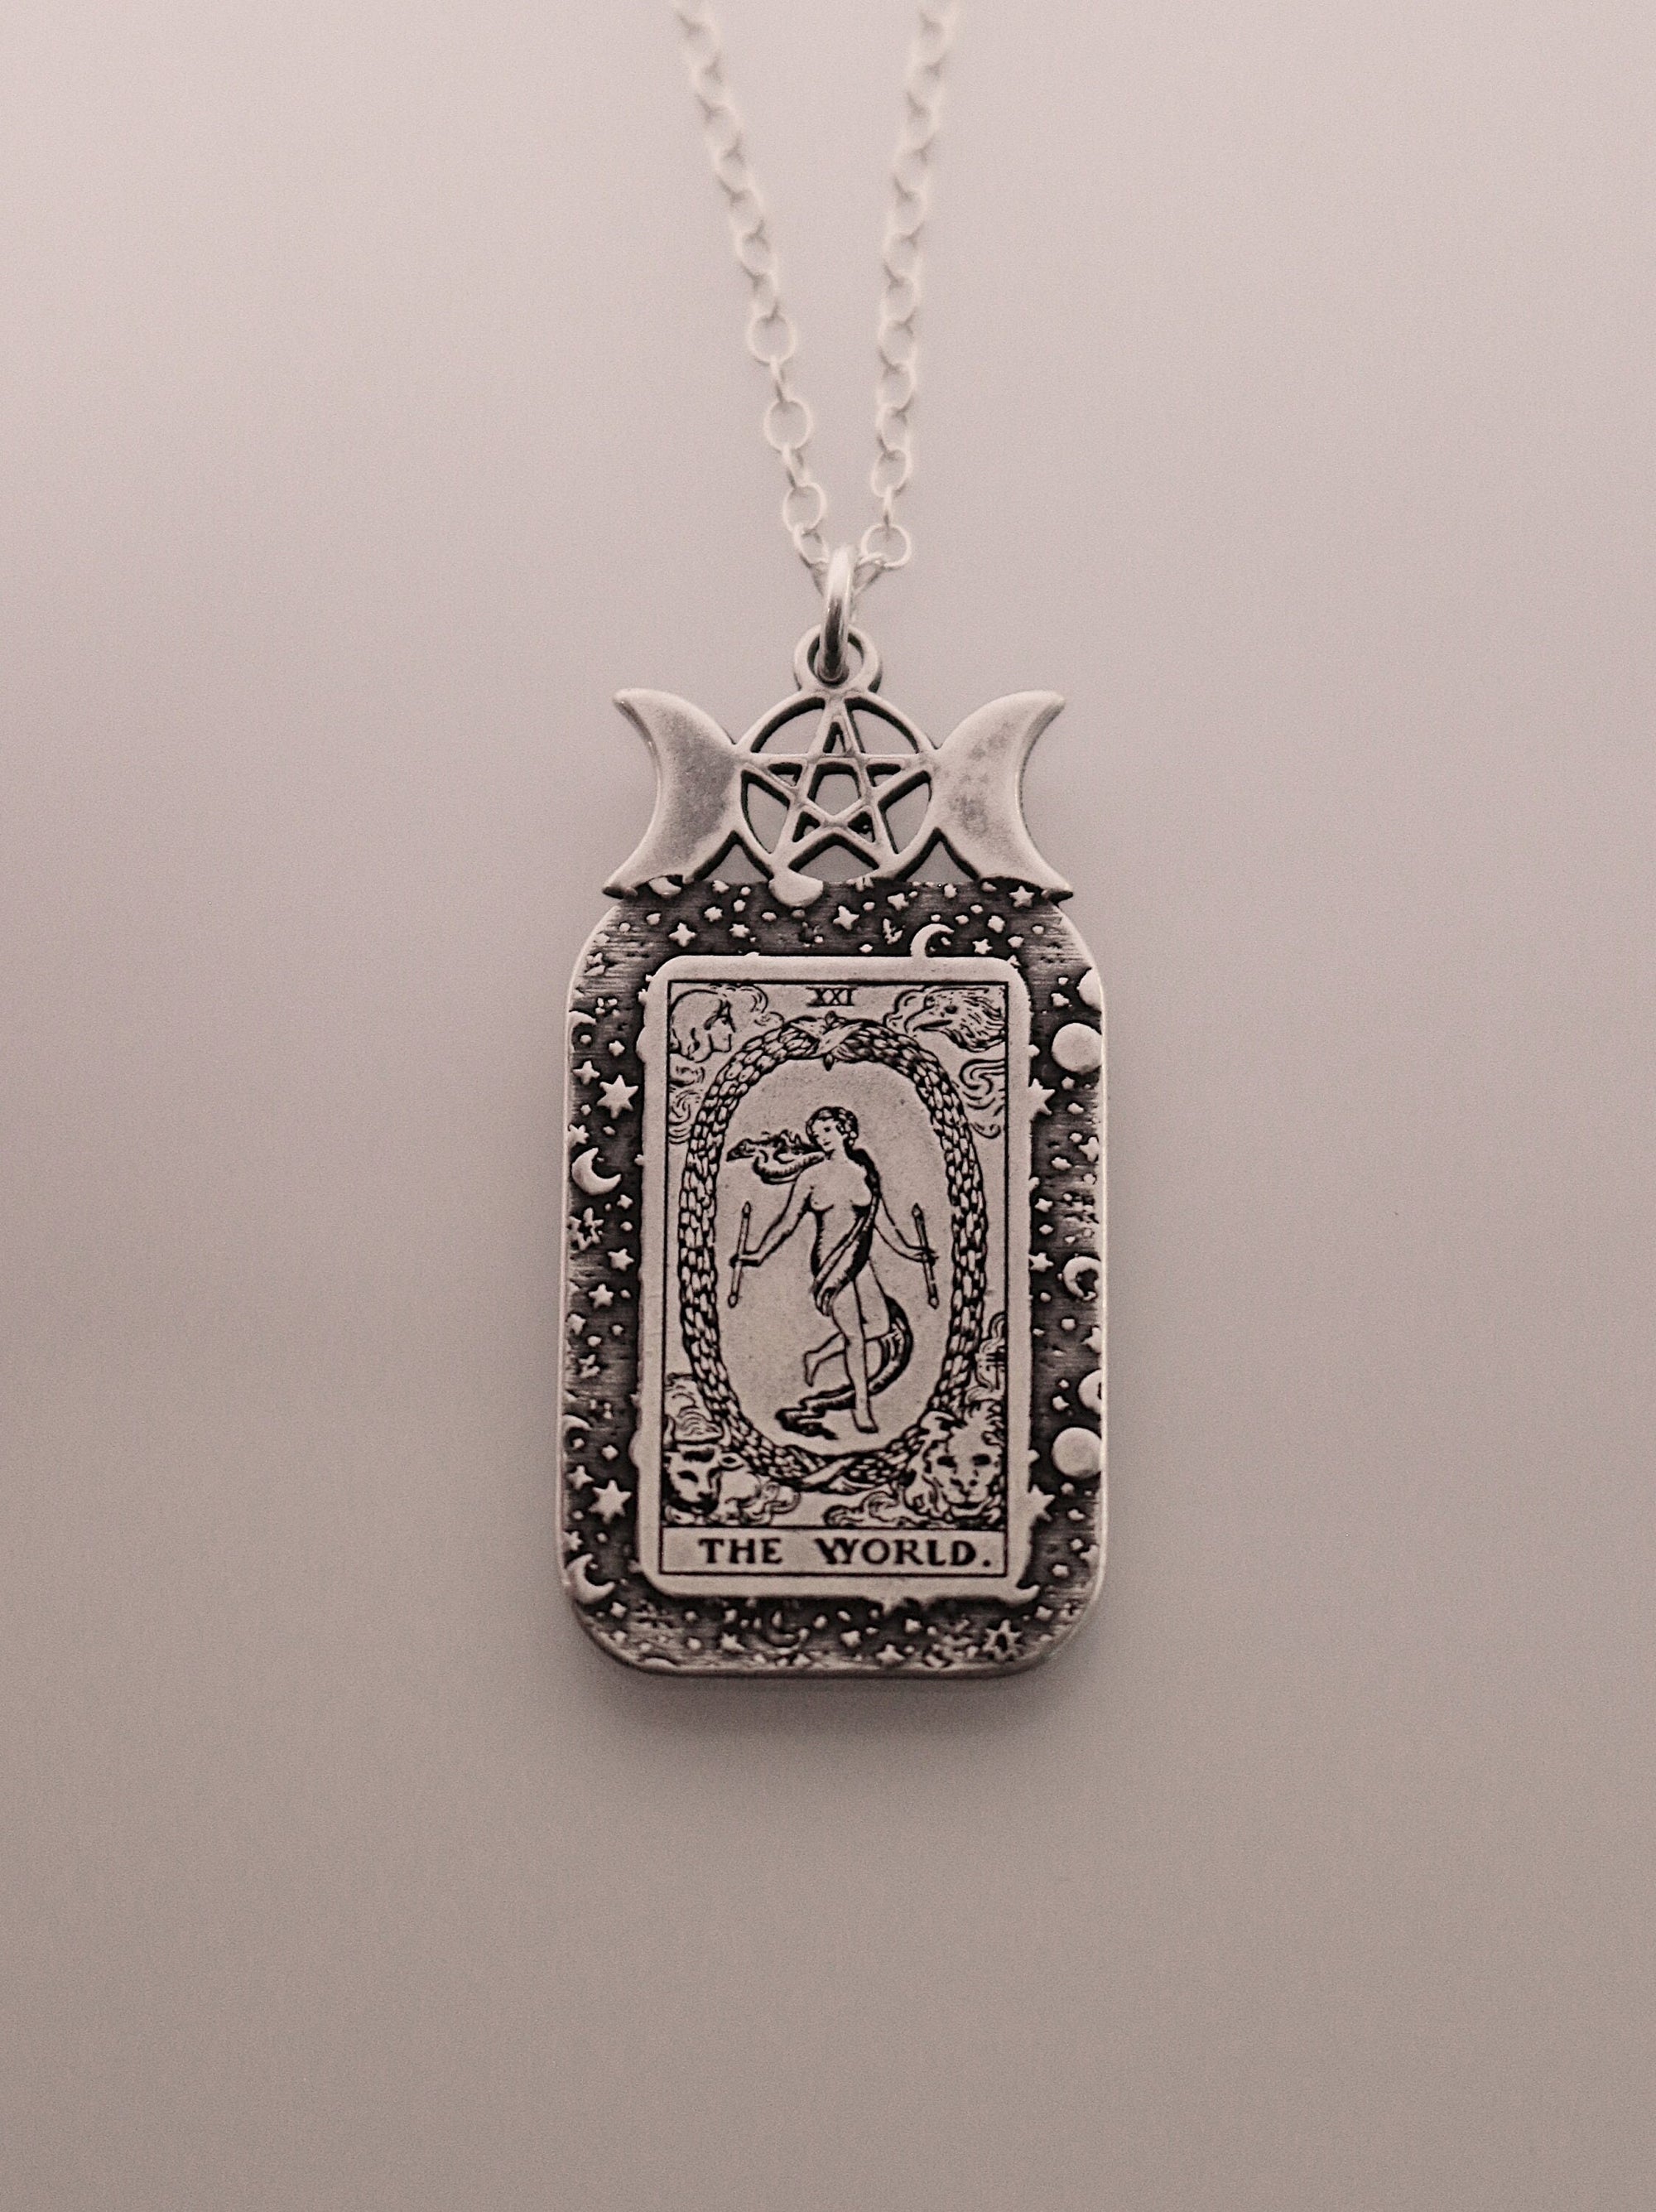 The World Tarot Card Necklace | Best Friend Birthday Gift | Tarot Card Necklace | Celestial Triple Moon Goddess Jewelry | Witch Necklace